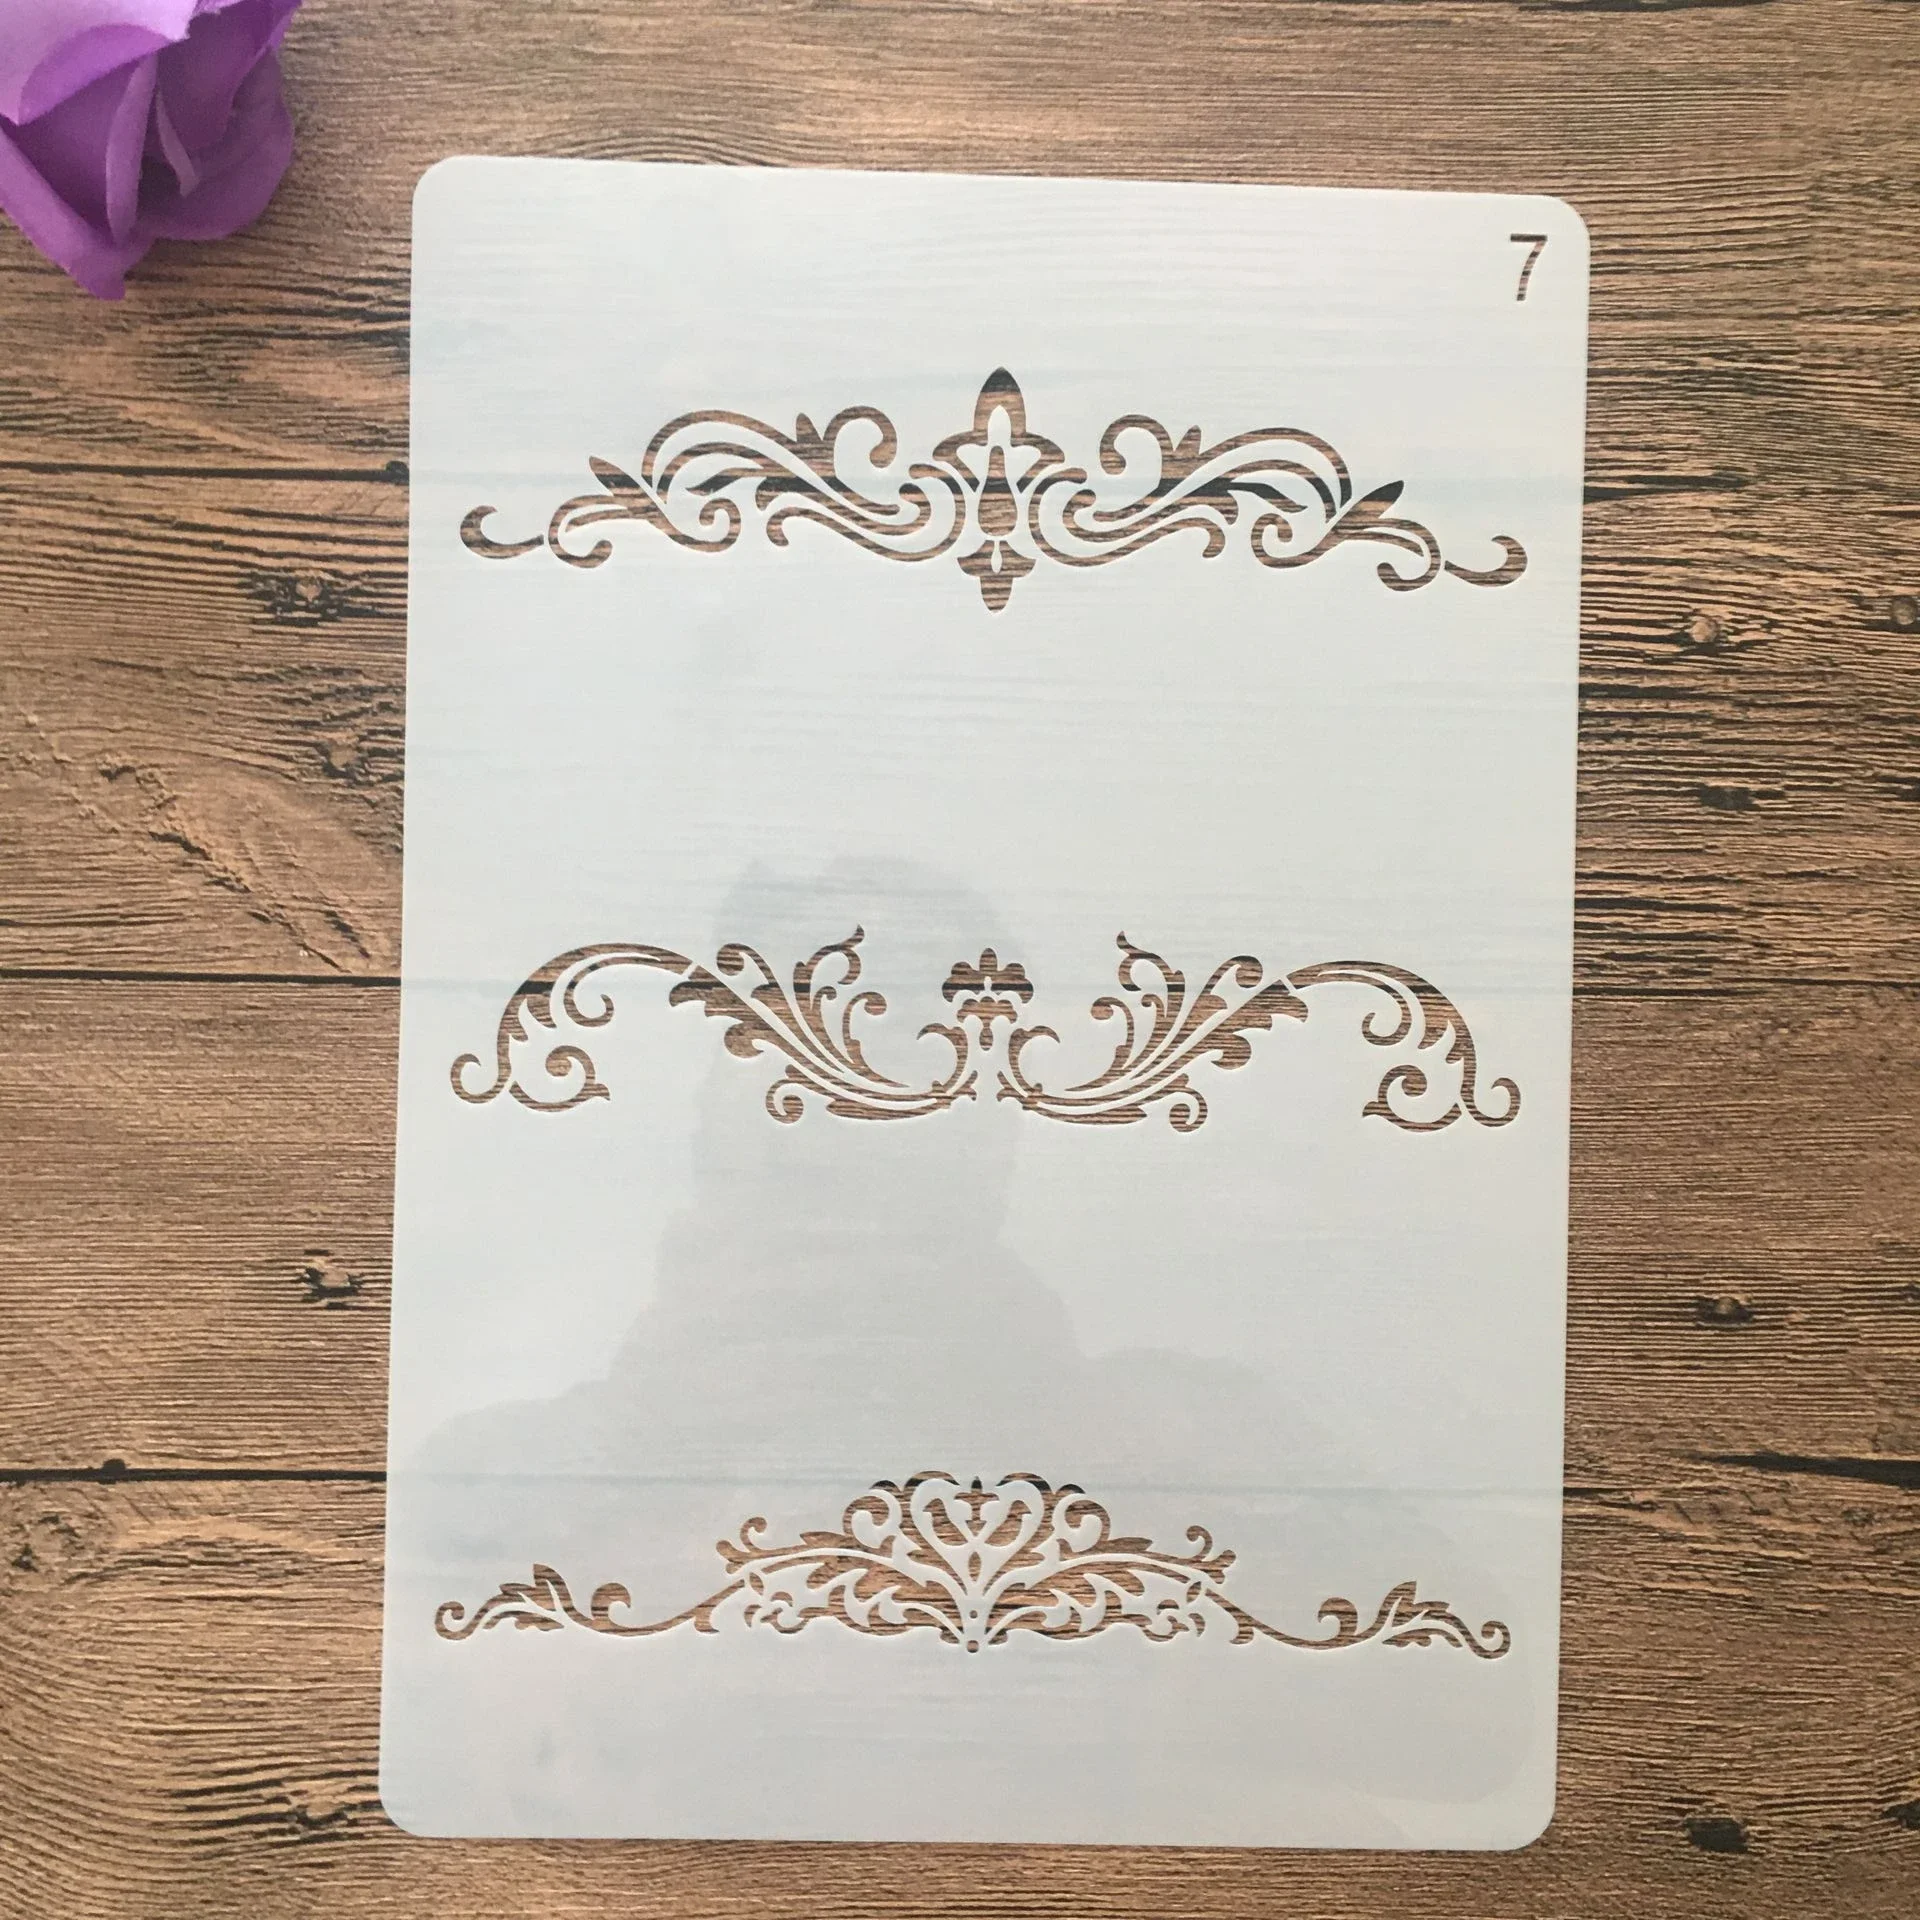 A4 29 * 21cm Crown Flower wall layered stencil painting scrapbook stamp album decoration embossed paper card template decoration custom luxury custom printing embossed oem brand logo cotton paper cardboard name business card